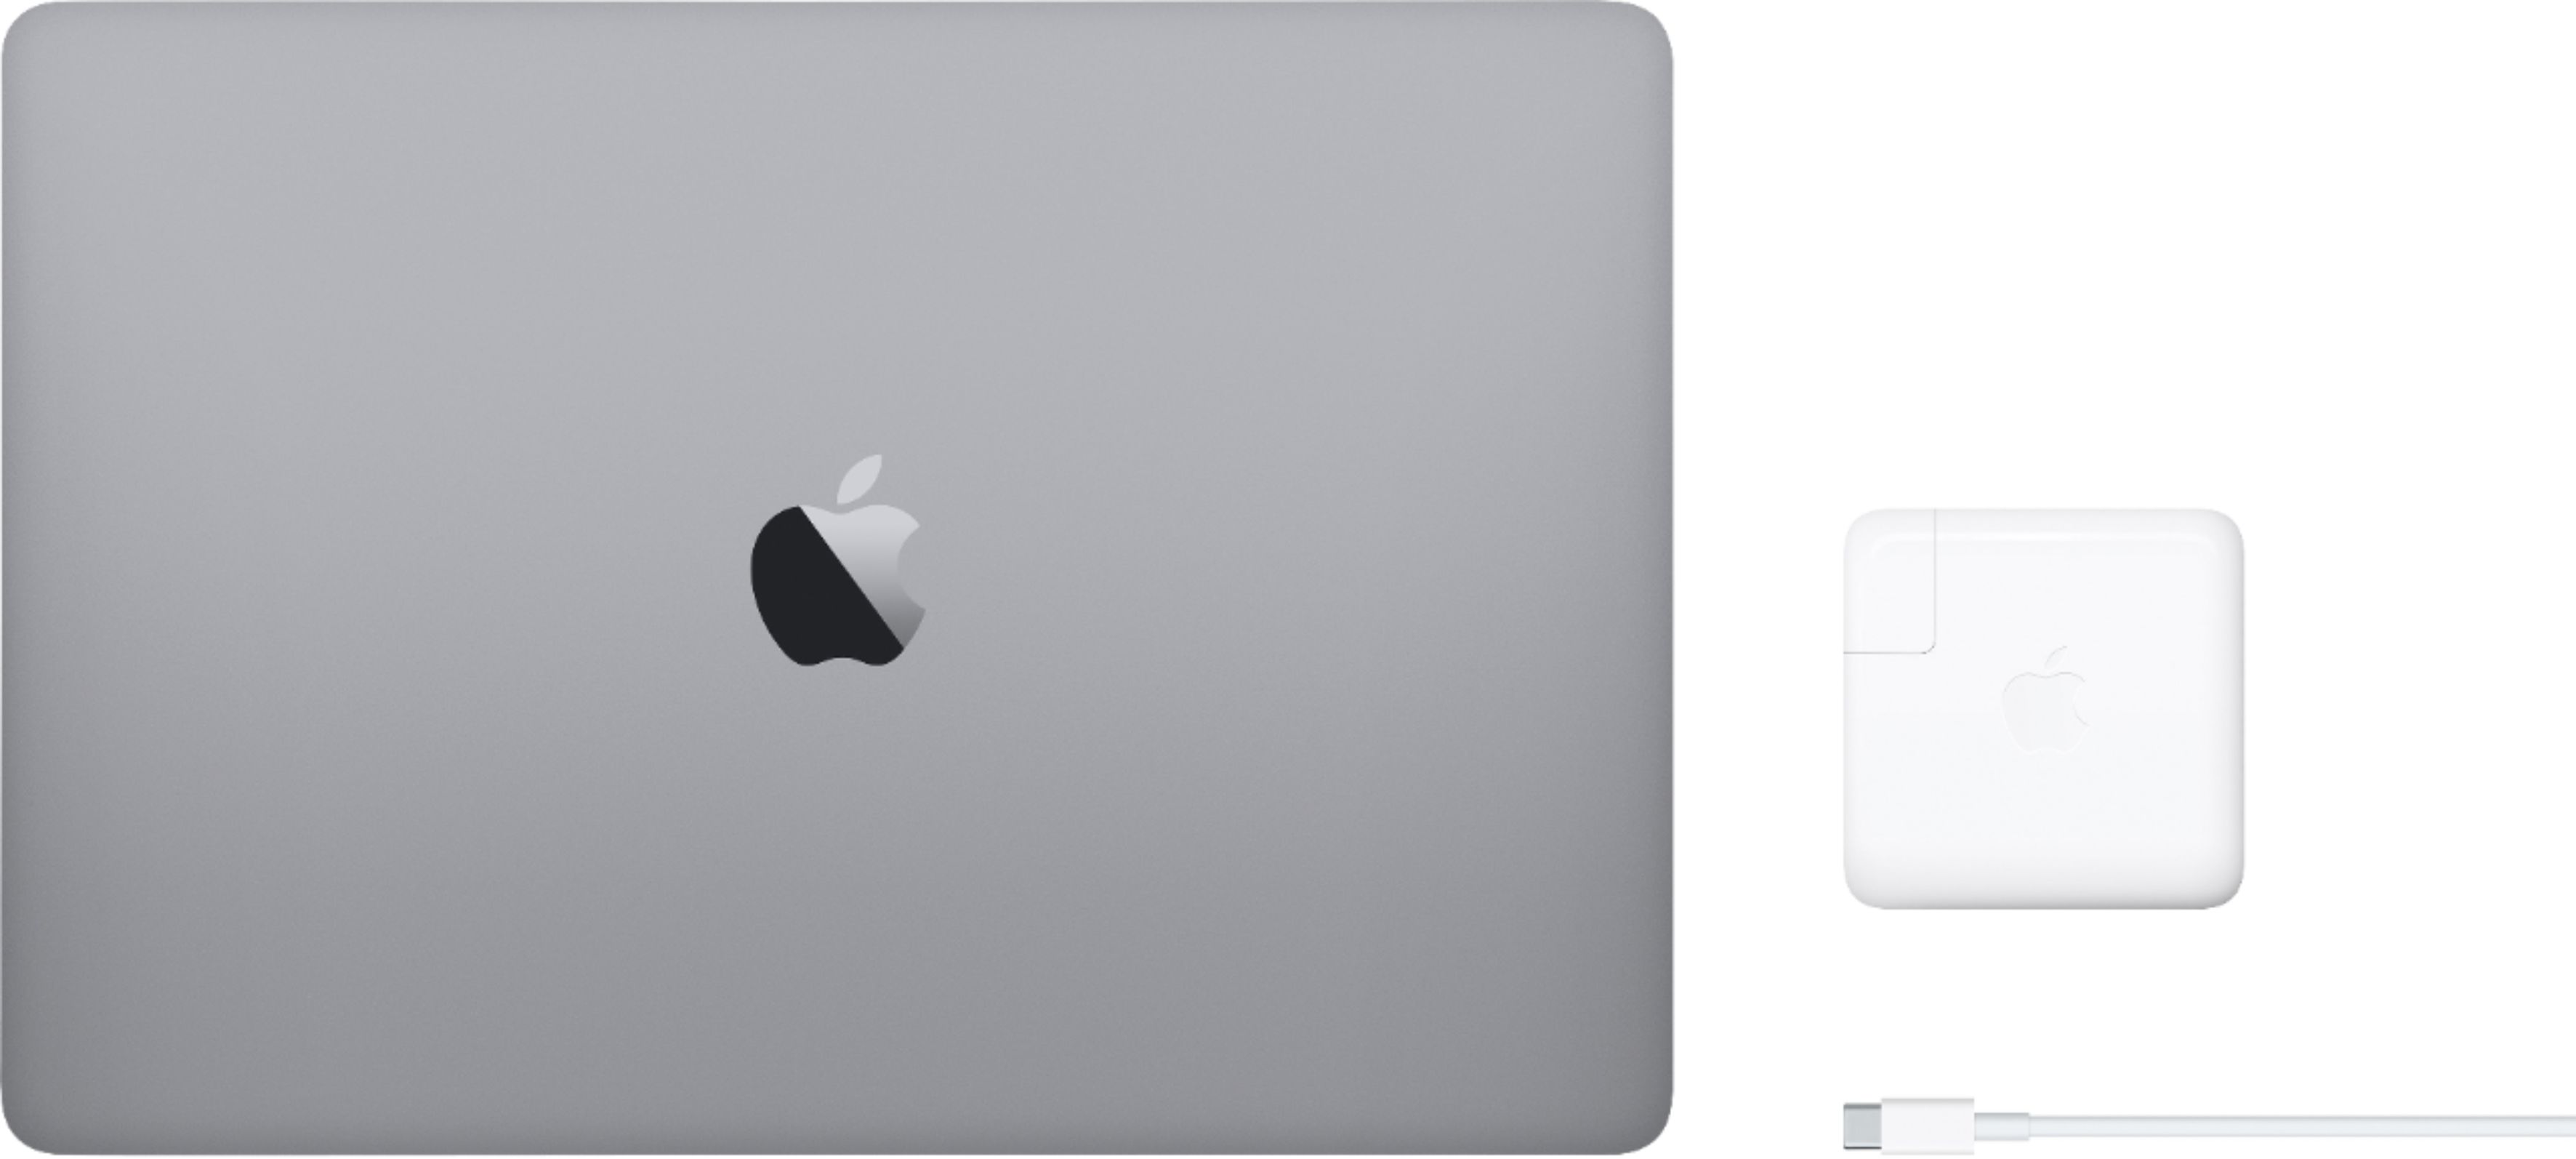 Download Free Space Gray Or Silver Macbook Pro Swimsuits SVG DXF Cut File